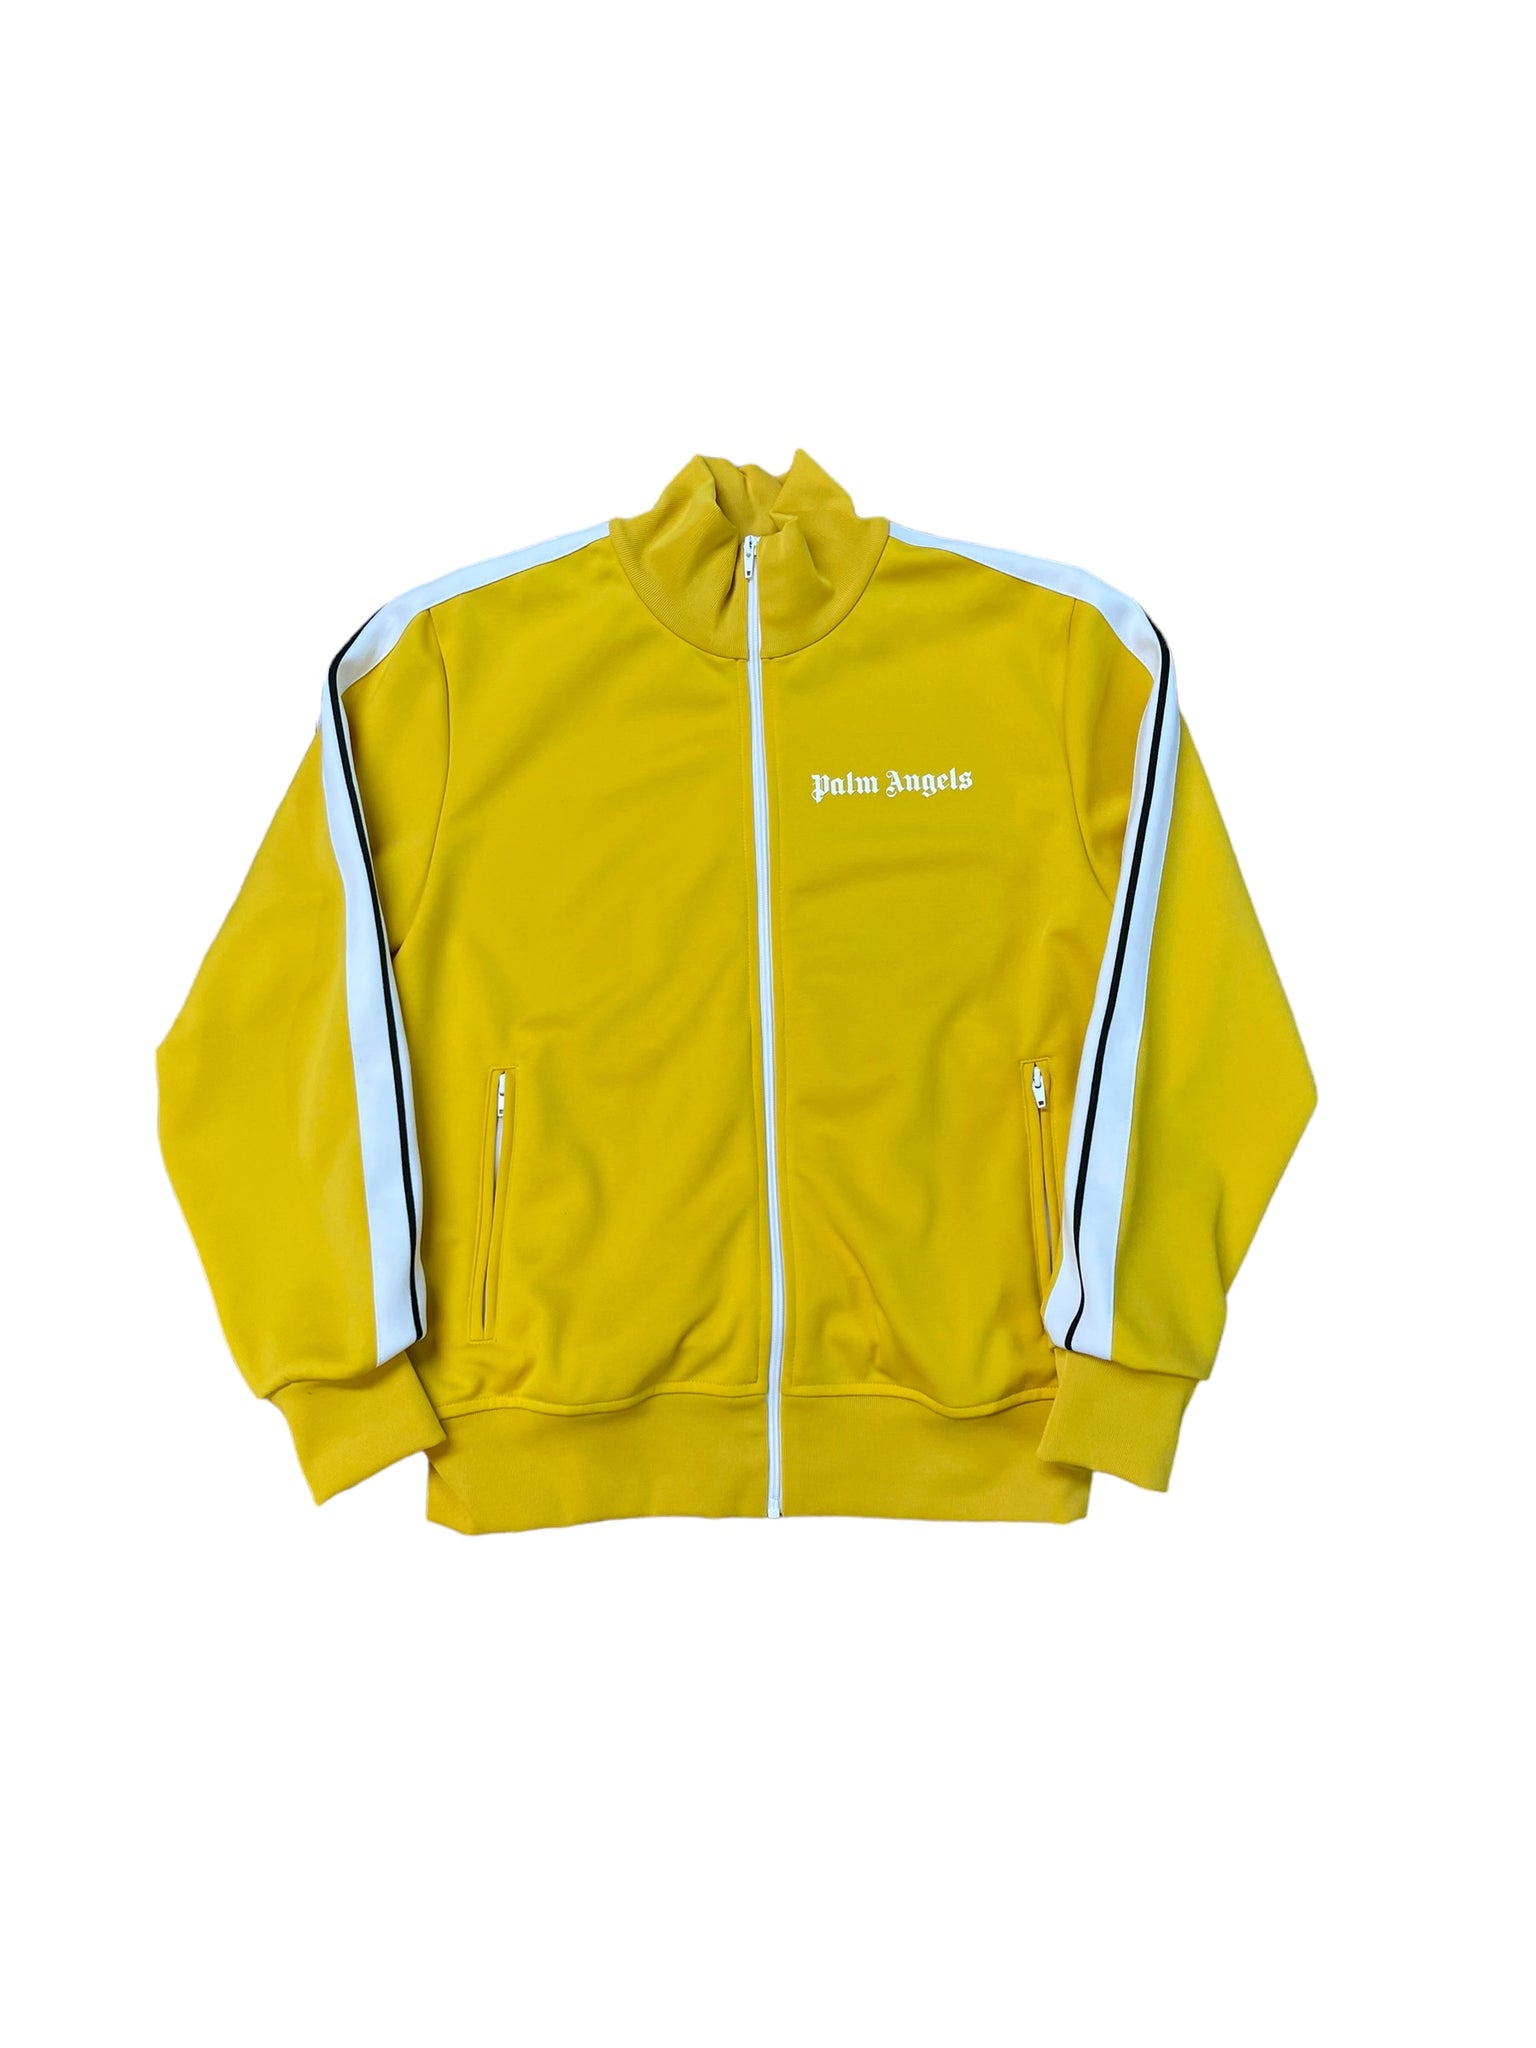 Palm Angels Track Jacket "Yellow" (Pre-Owned)